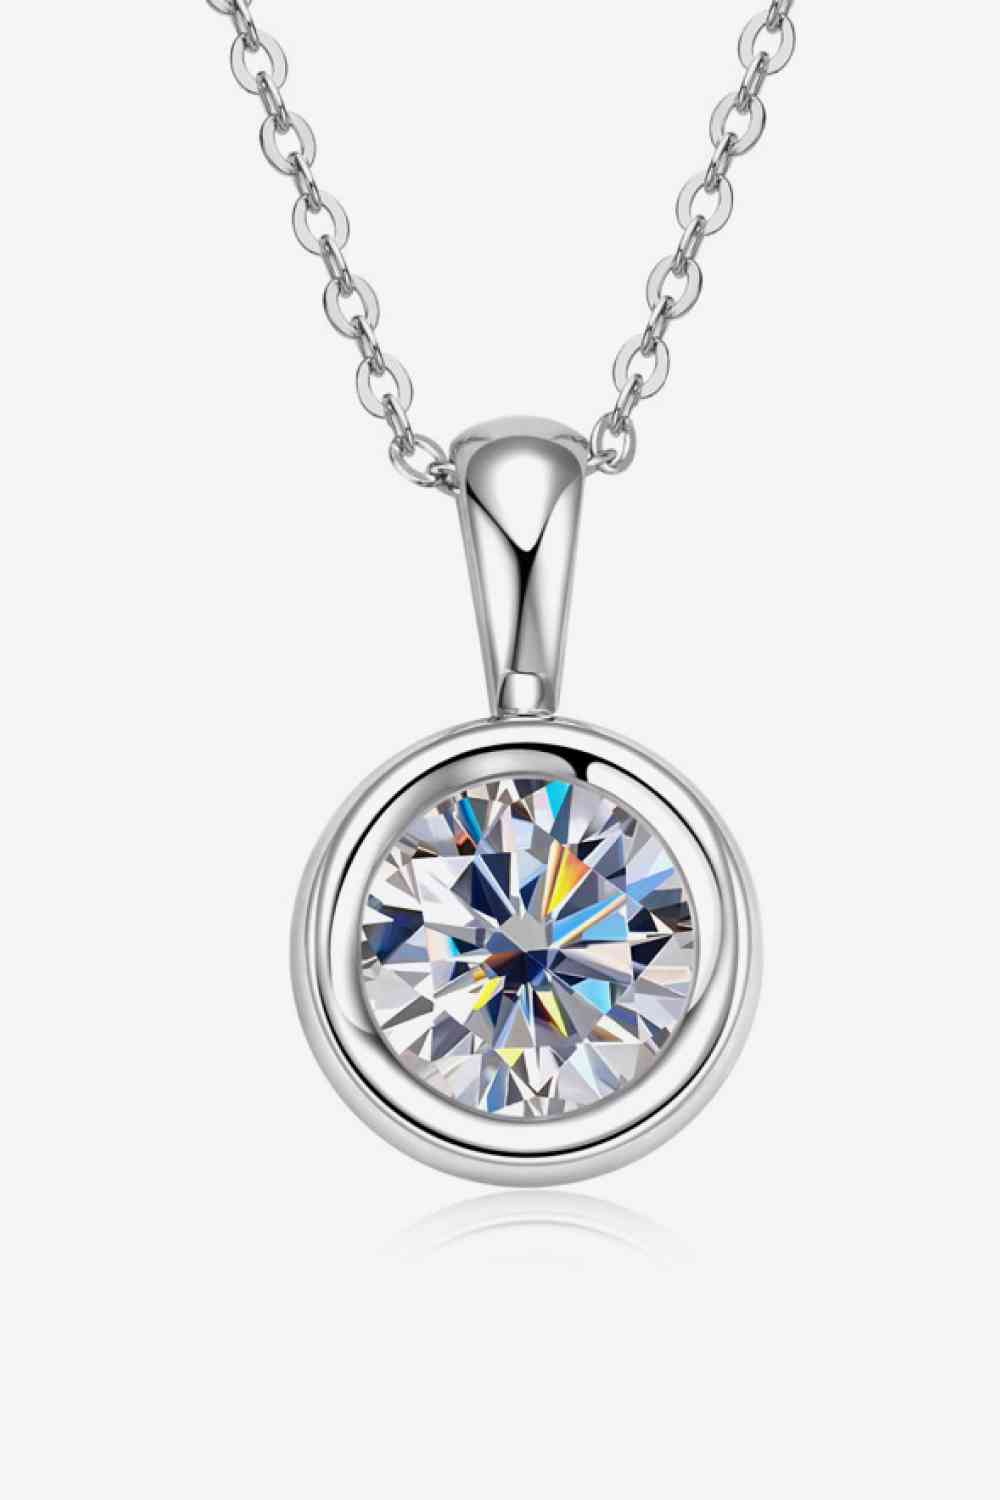 2 Carat Moissanite 925 Sterling Silver Necklace BLUE ZONE PLANET